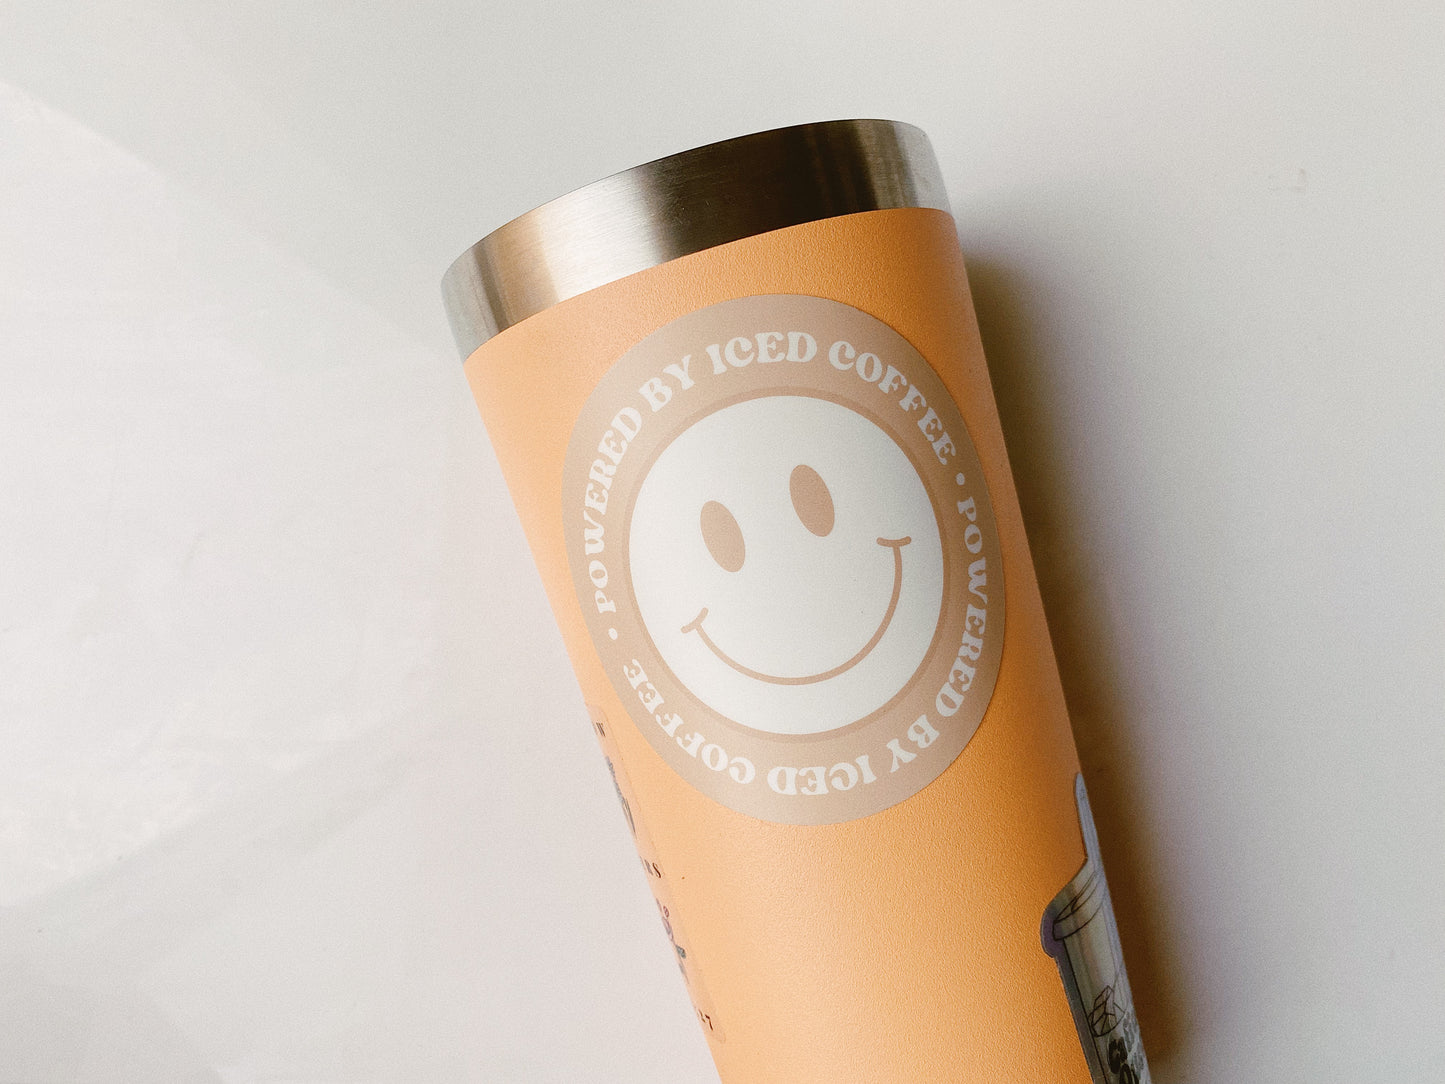 Powered By Iced Coffee Sticker